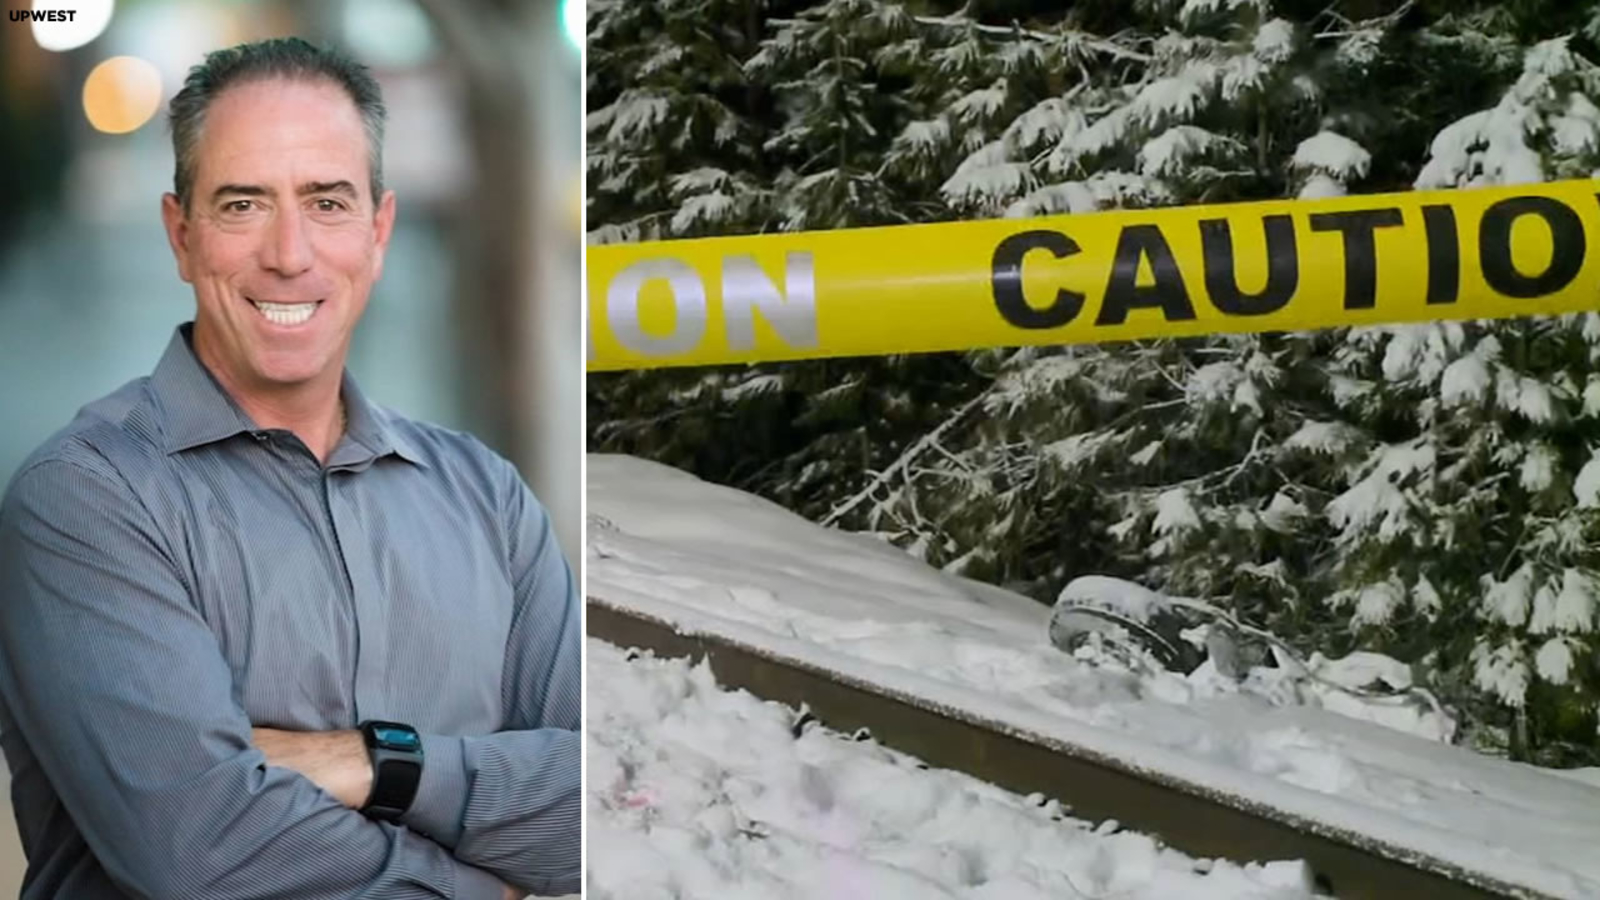 Israeli couple killed in Truckee plane crash ID’d as Liron and Naomi Petrushka by Palo Alto firm UpWest Labs [Video]